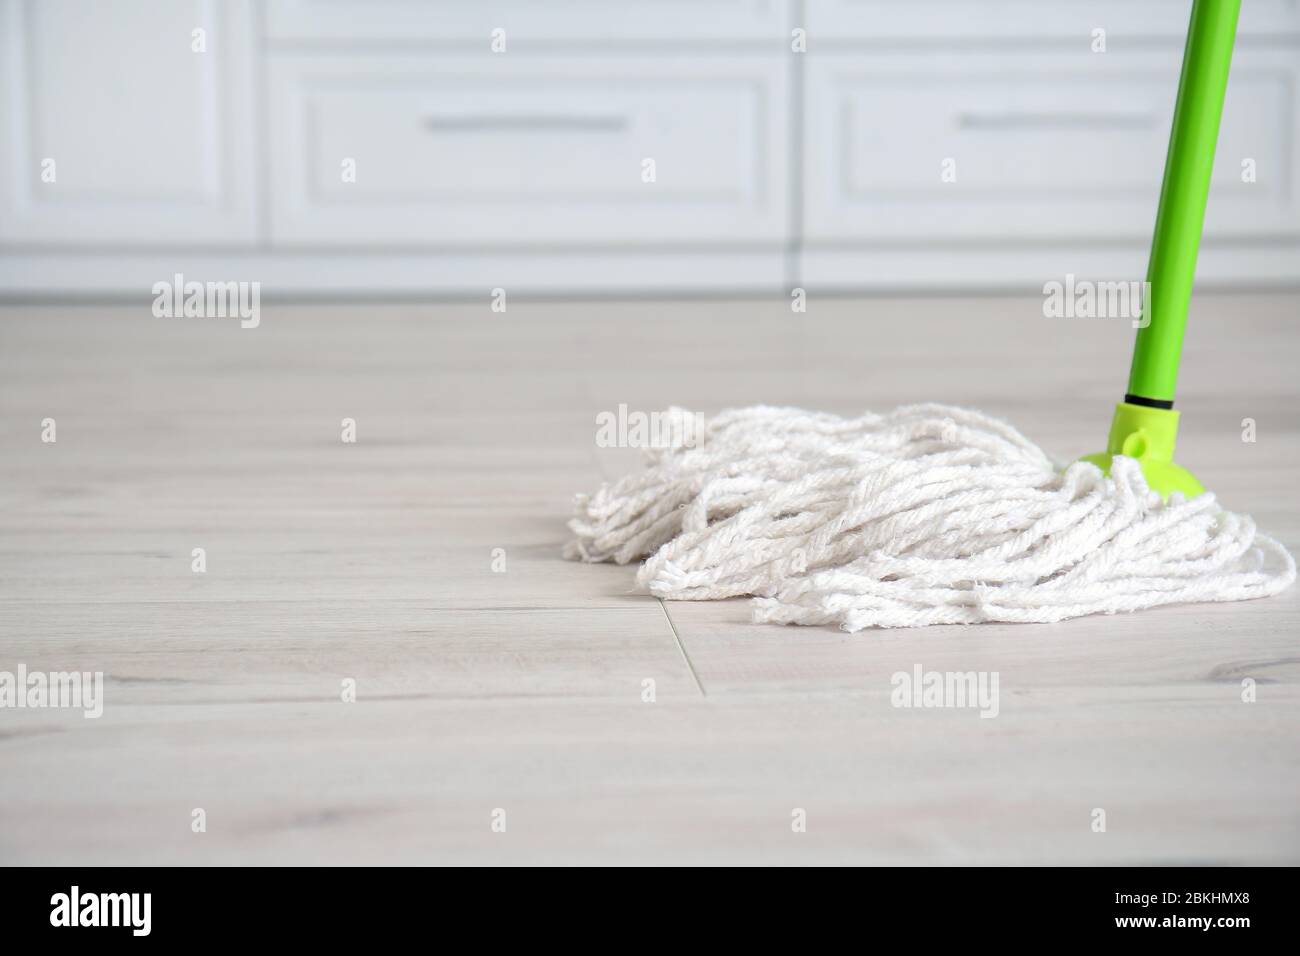 Mopping of floor in kitchen Stock Photo